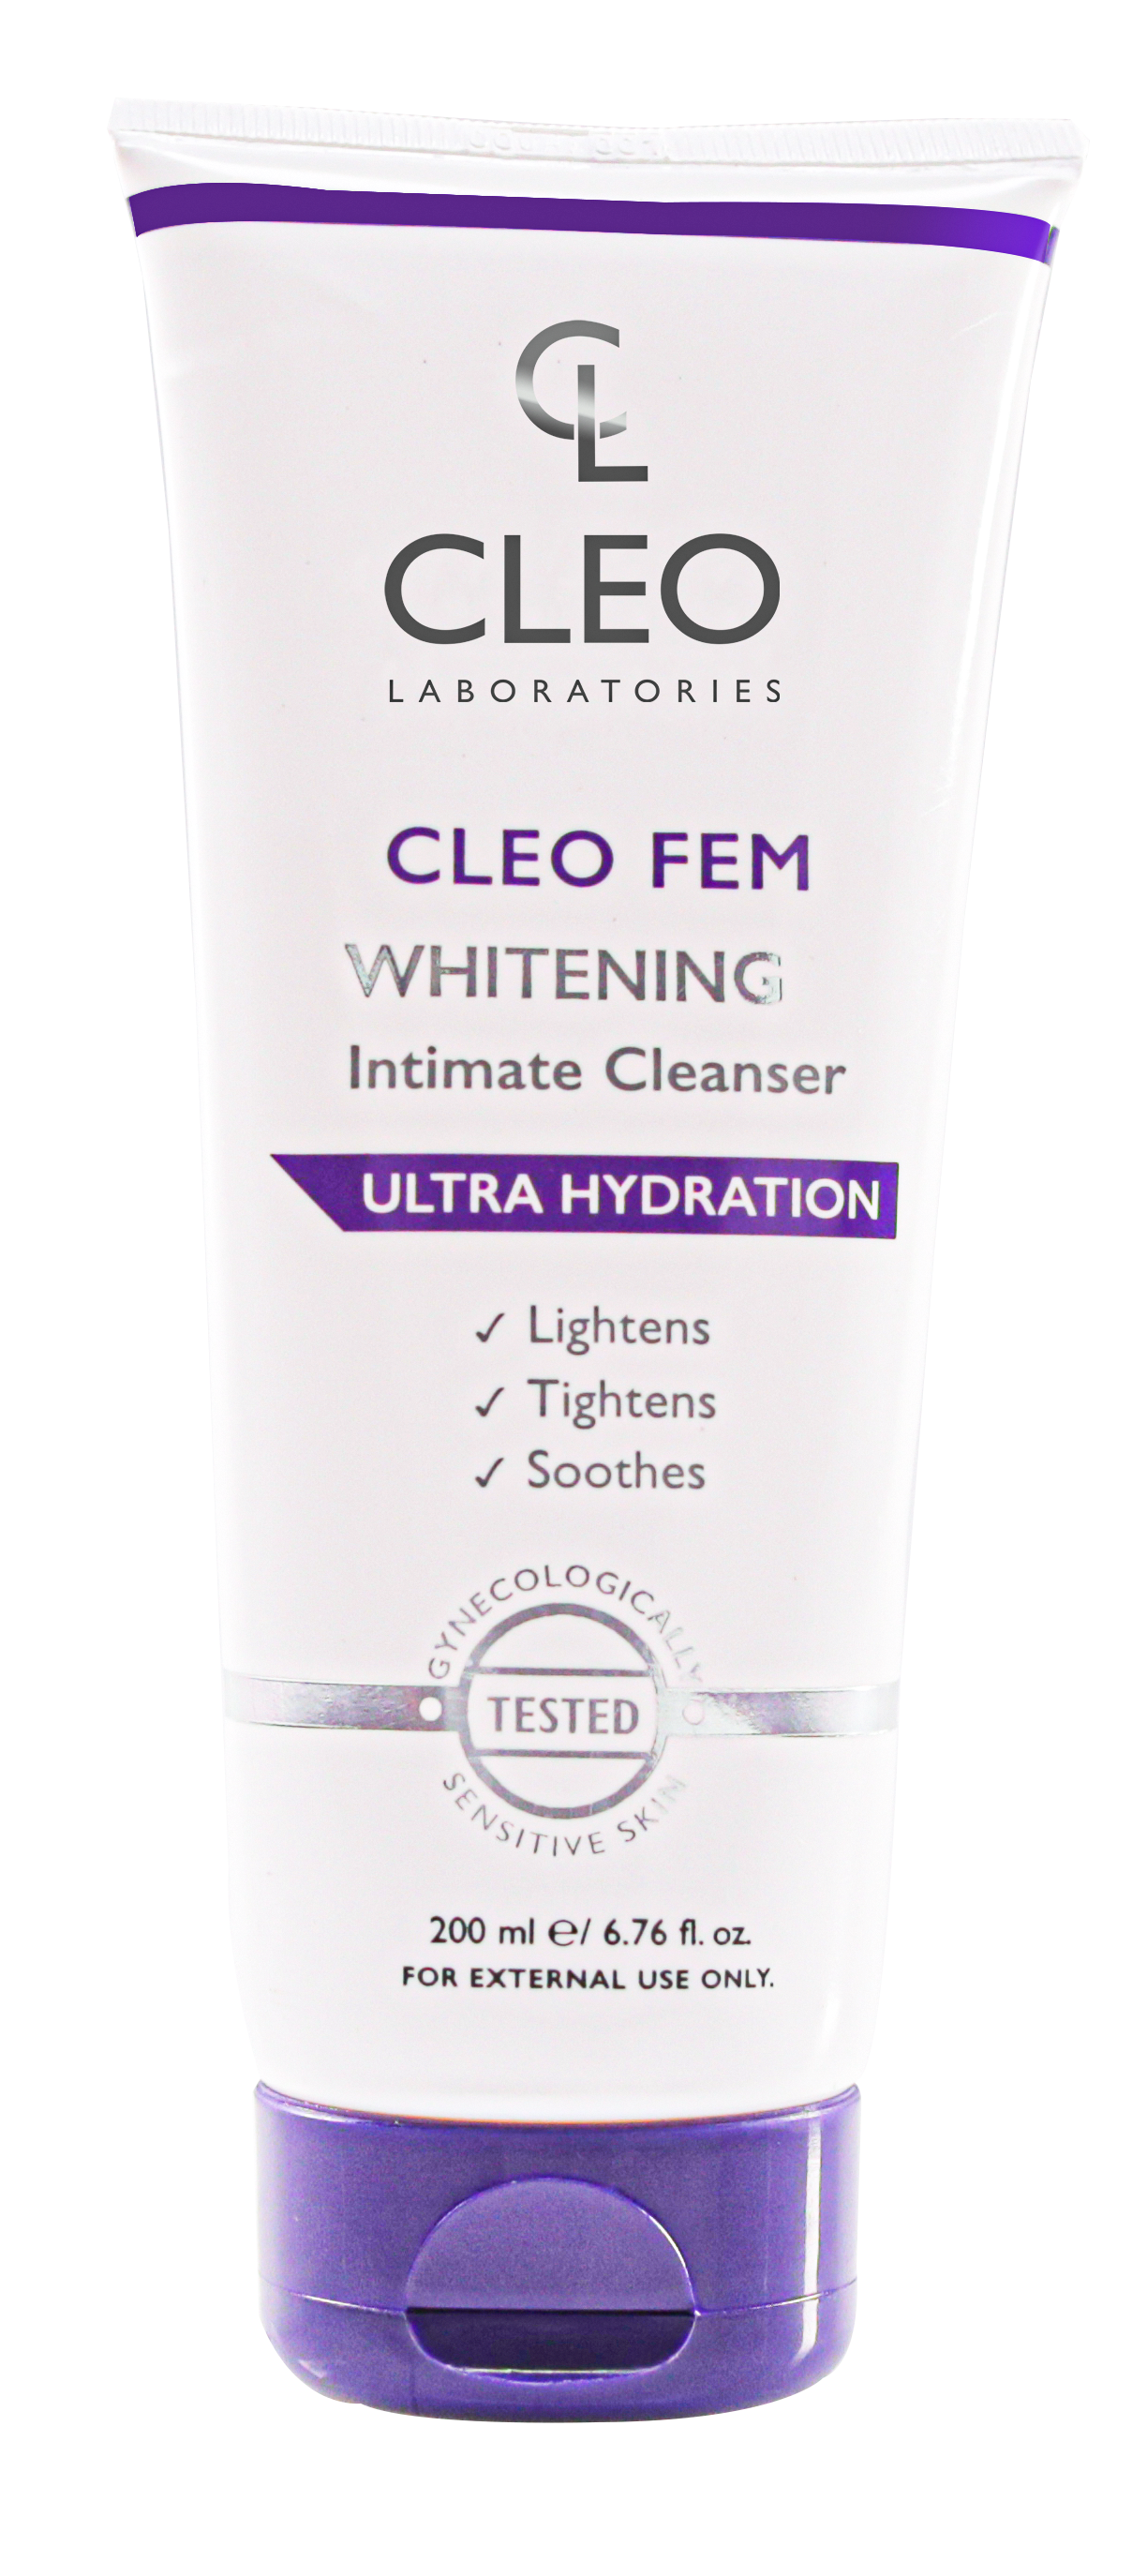 Cleo Fem Whitening Intimate Cleanser 200 ml, Wholesale Prices